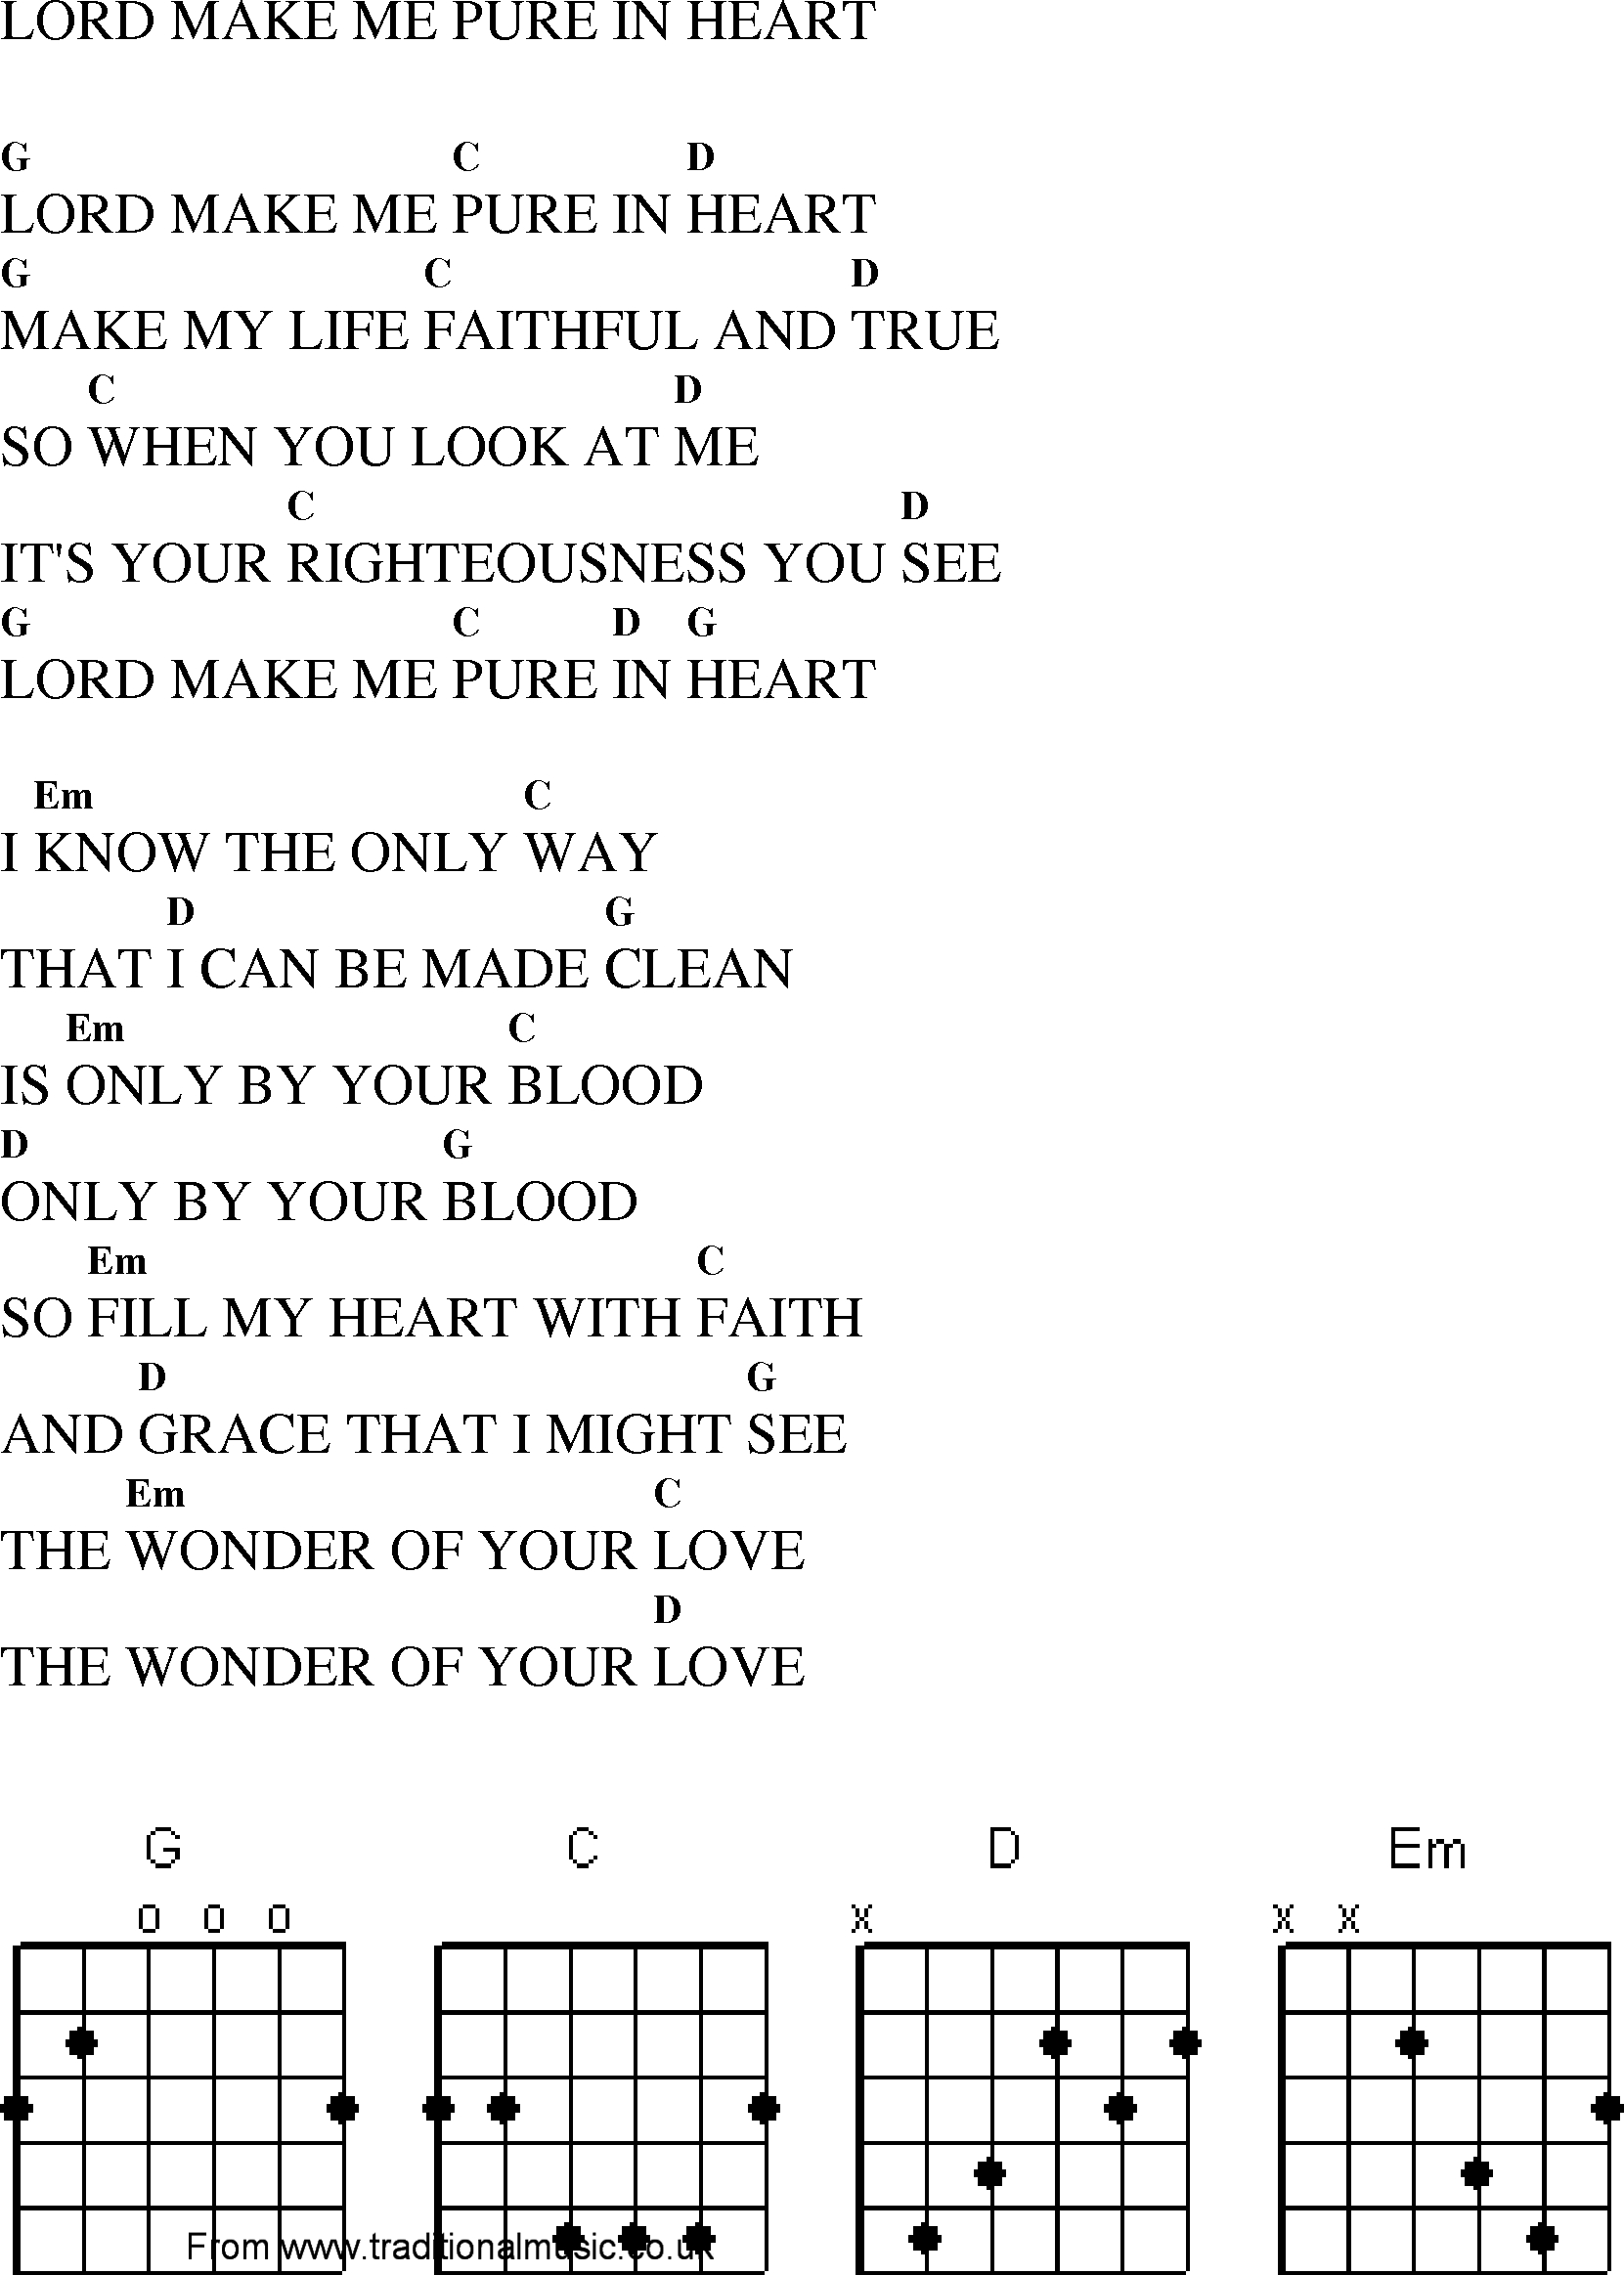 Heart Of Worship Chords Christian Gospel Worship Song Lyrics With Chords Lord Make Me Pure